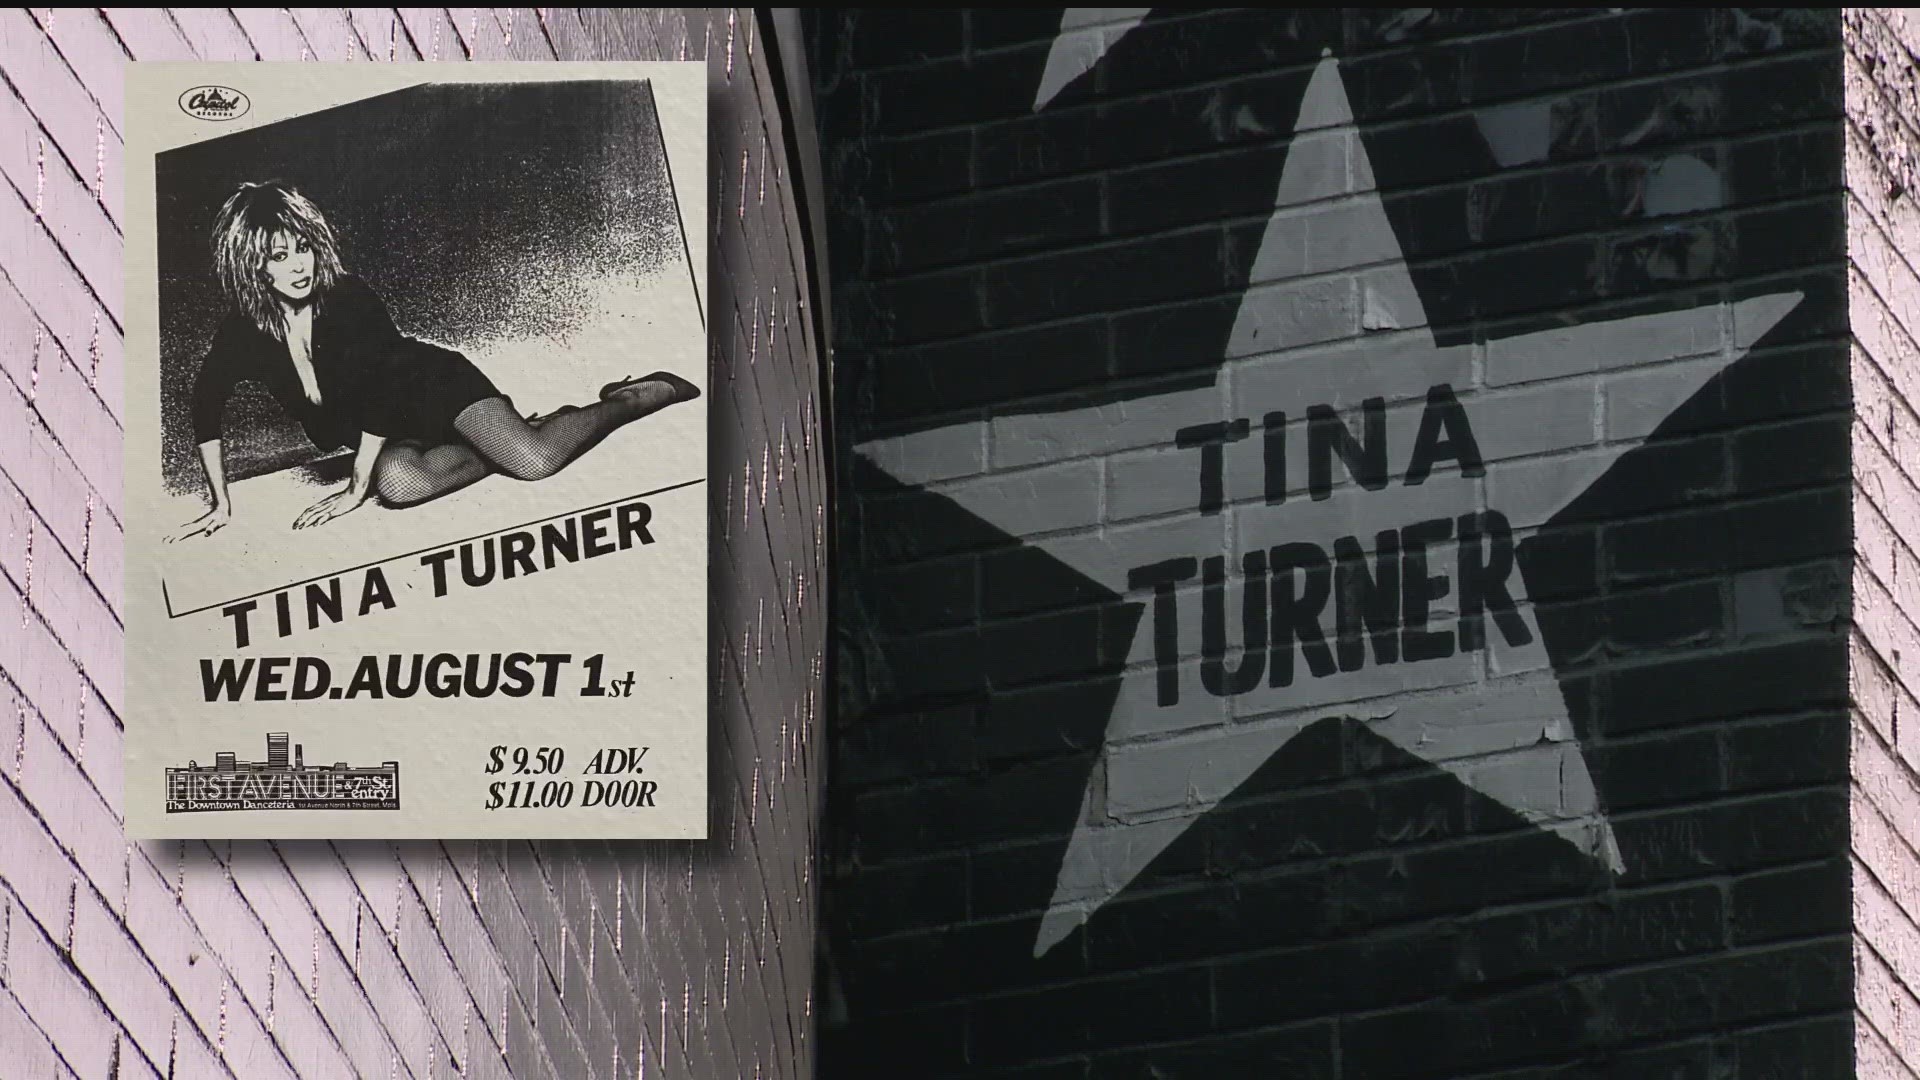 Through the span of her career, Turner made several stops in the Twin Cities, landing her a star outside First Avenue after an appearance in 1982.